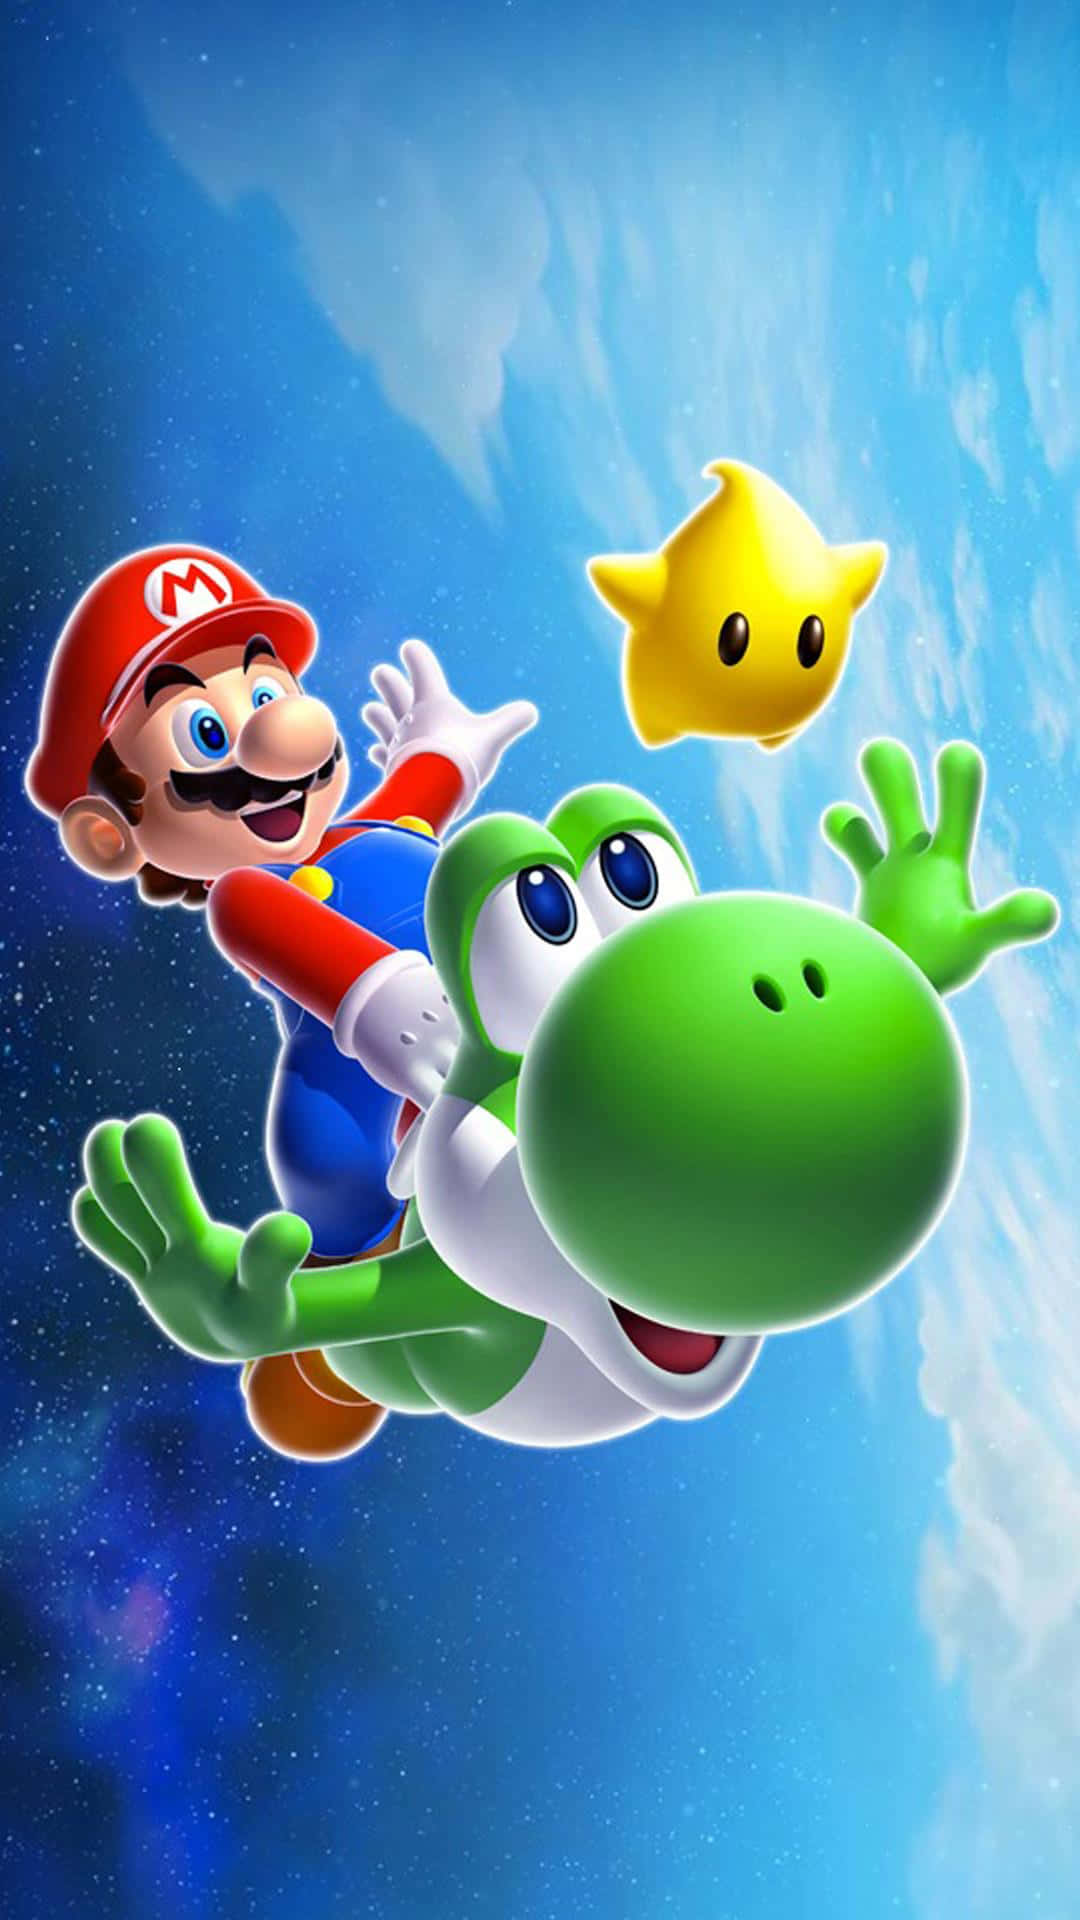 A Mario And Yoshi Flying In The Sky Wallpaper